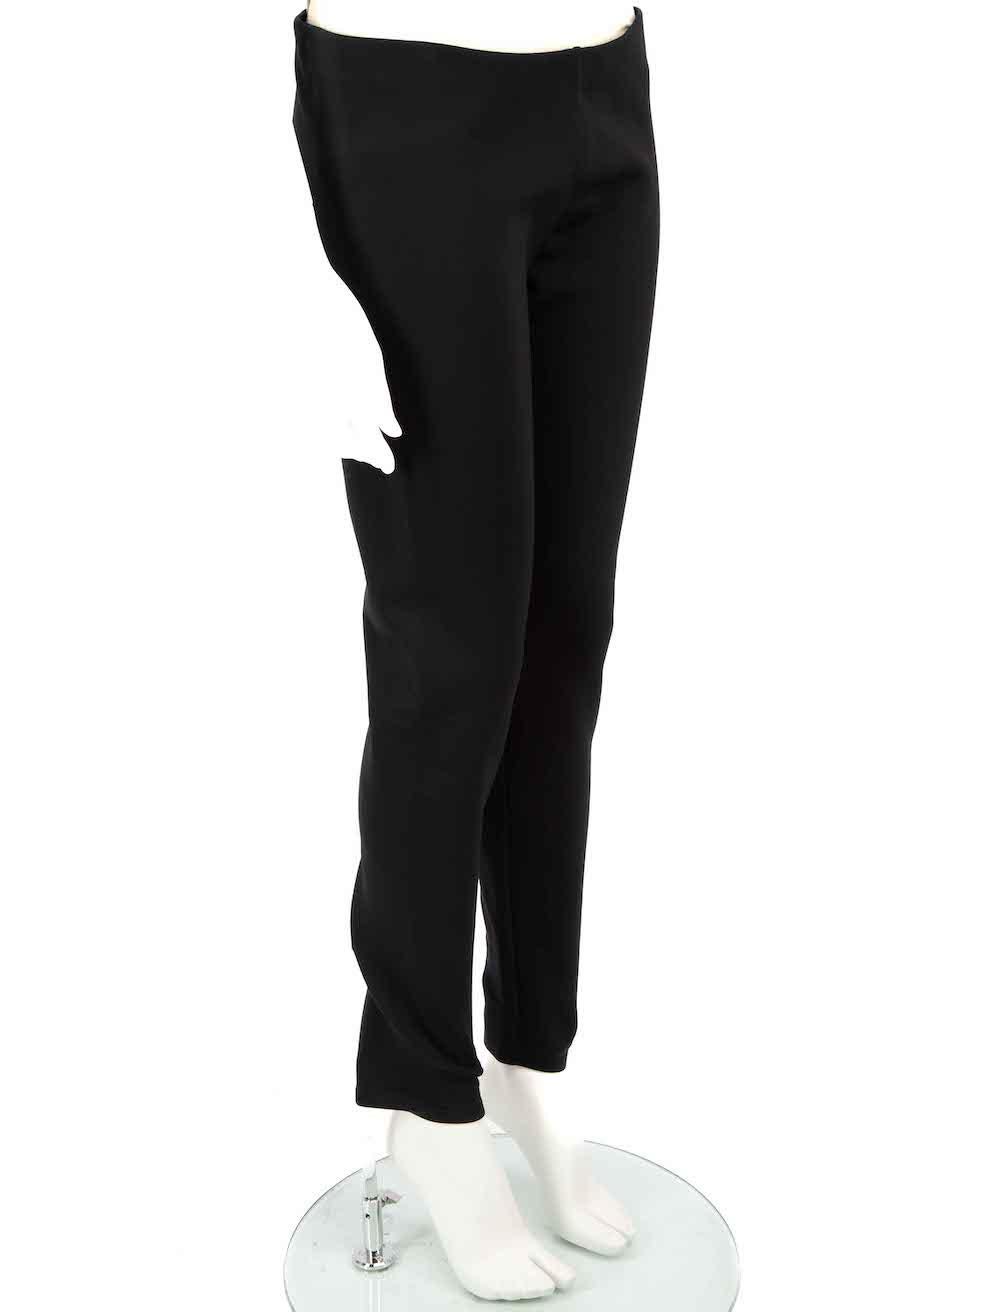 CONDITION is Very good. Hardly any visible wear to leggings is evident on this used The Row designer resale item.
 
 Details
 Black
 Synthetic
 Leggings
 Low rise
 Stretchy
 
 
 Made in Portugal
 
 Composition
 87% Polyamide, 13% Elastane
 
 Care